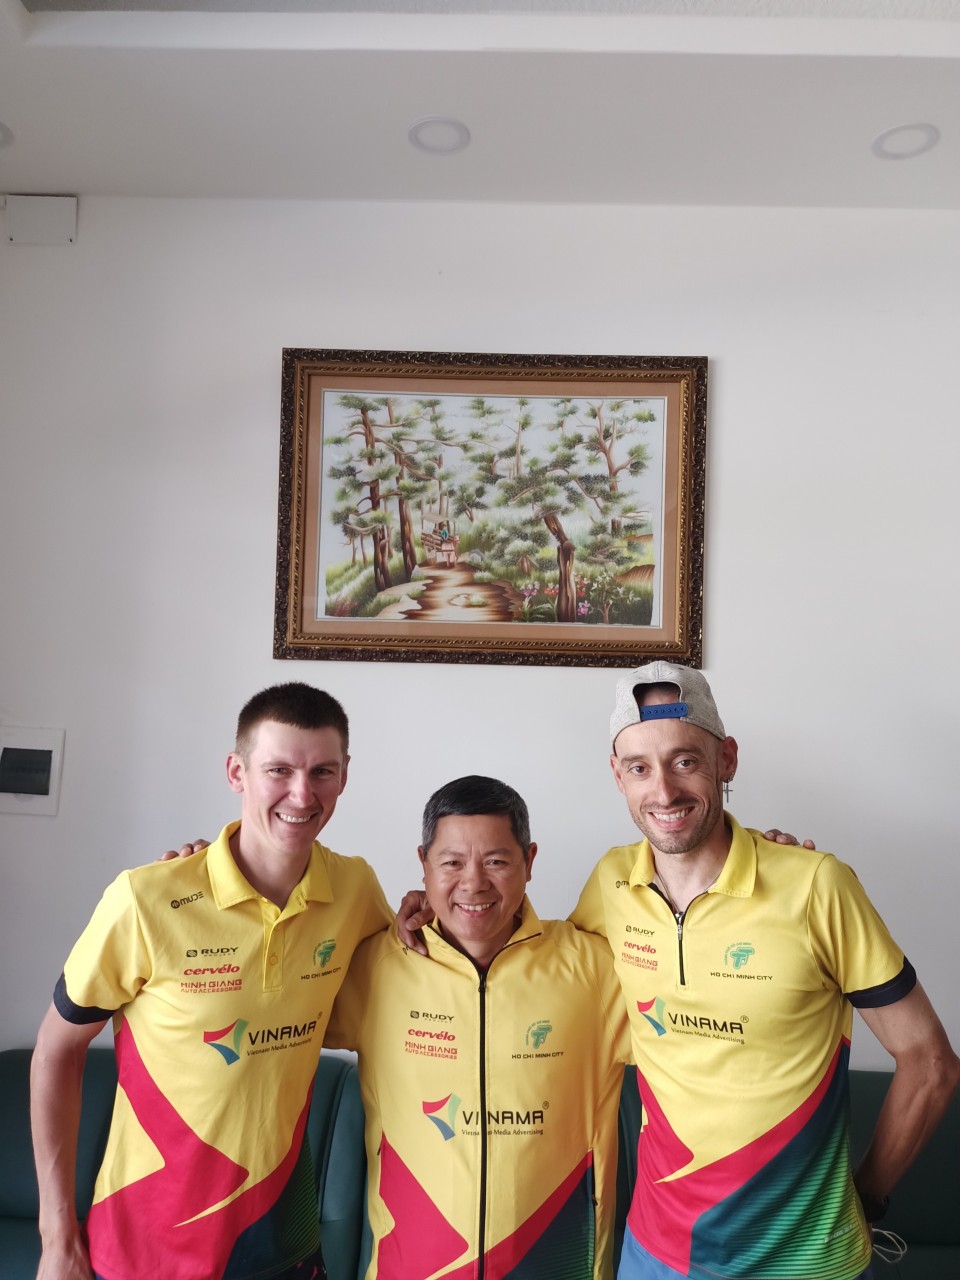 From left to right, Ho Chi Minh City-Vinama’s Russian cyclist Igor Frolov, head coach Do Thanh Dat, and Spanish cyclist Javier Perez. Photo: M.Q. / Tuoi Tre